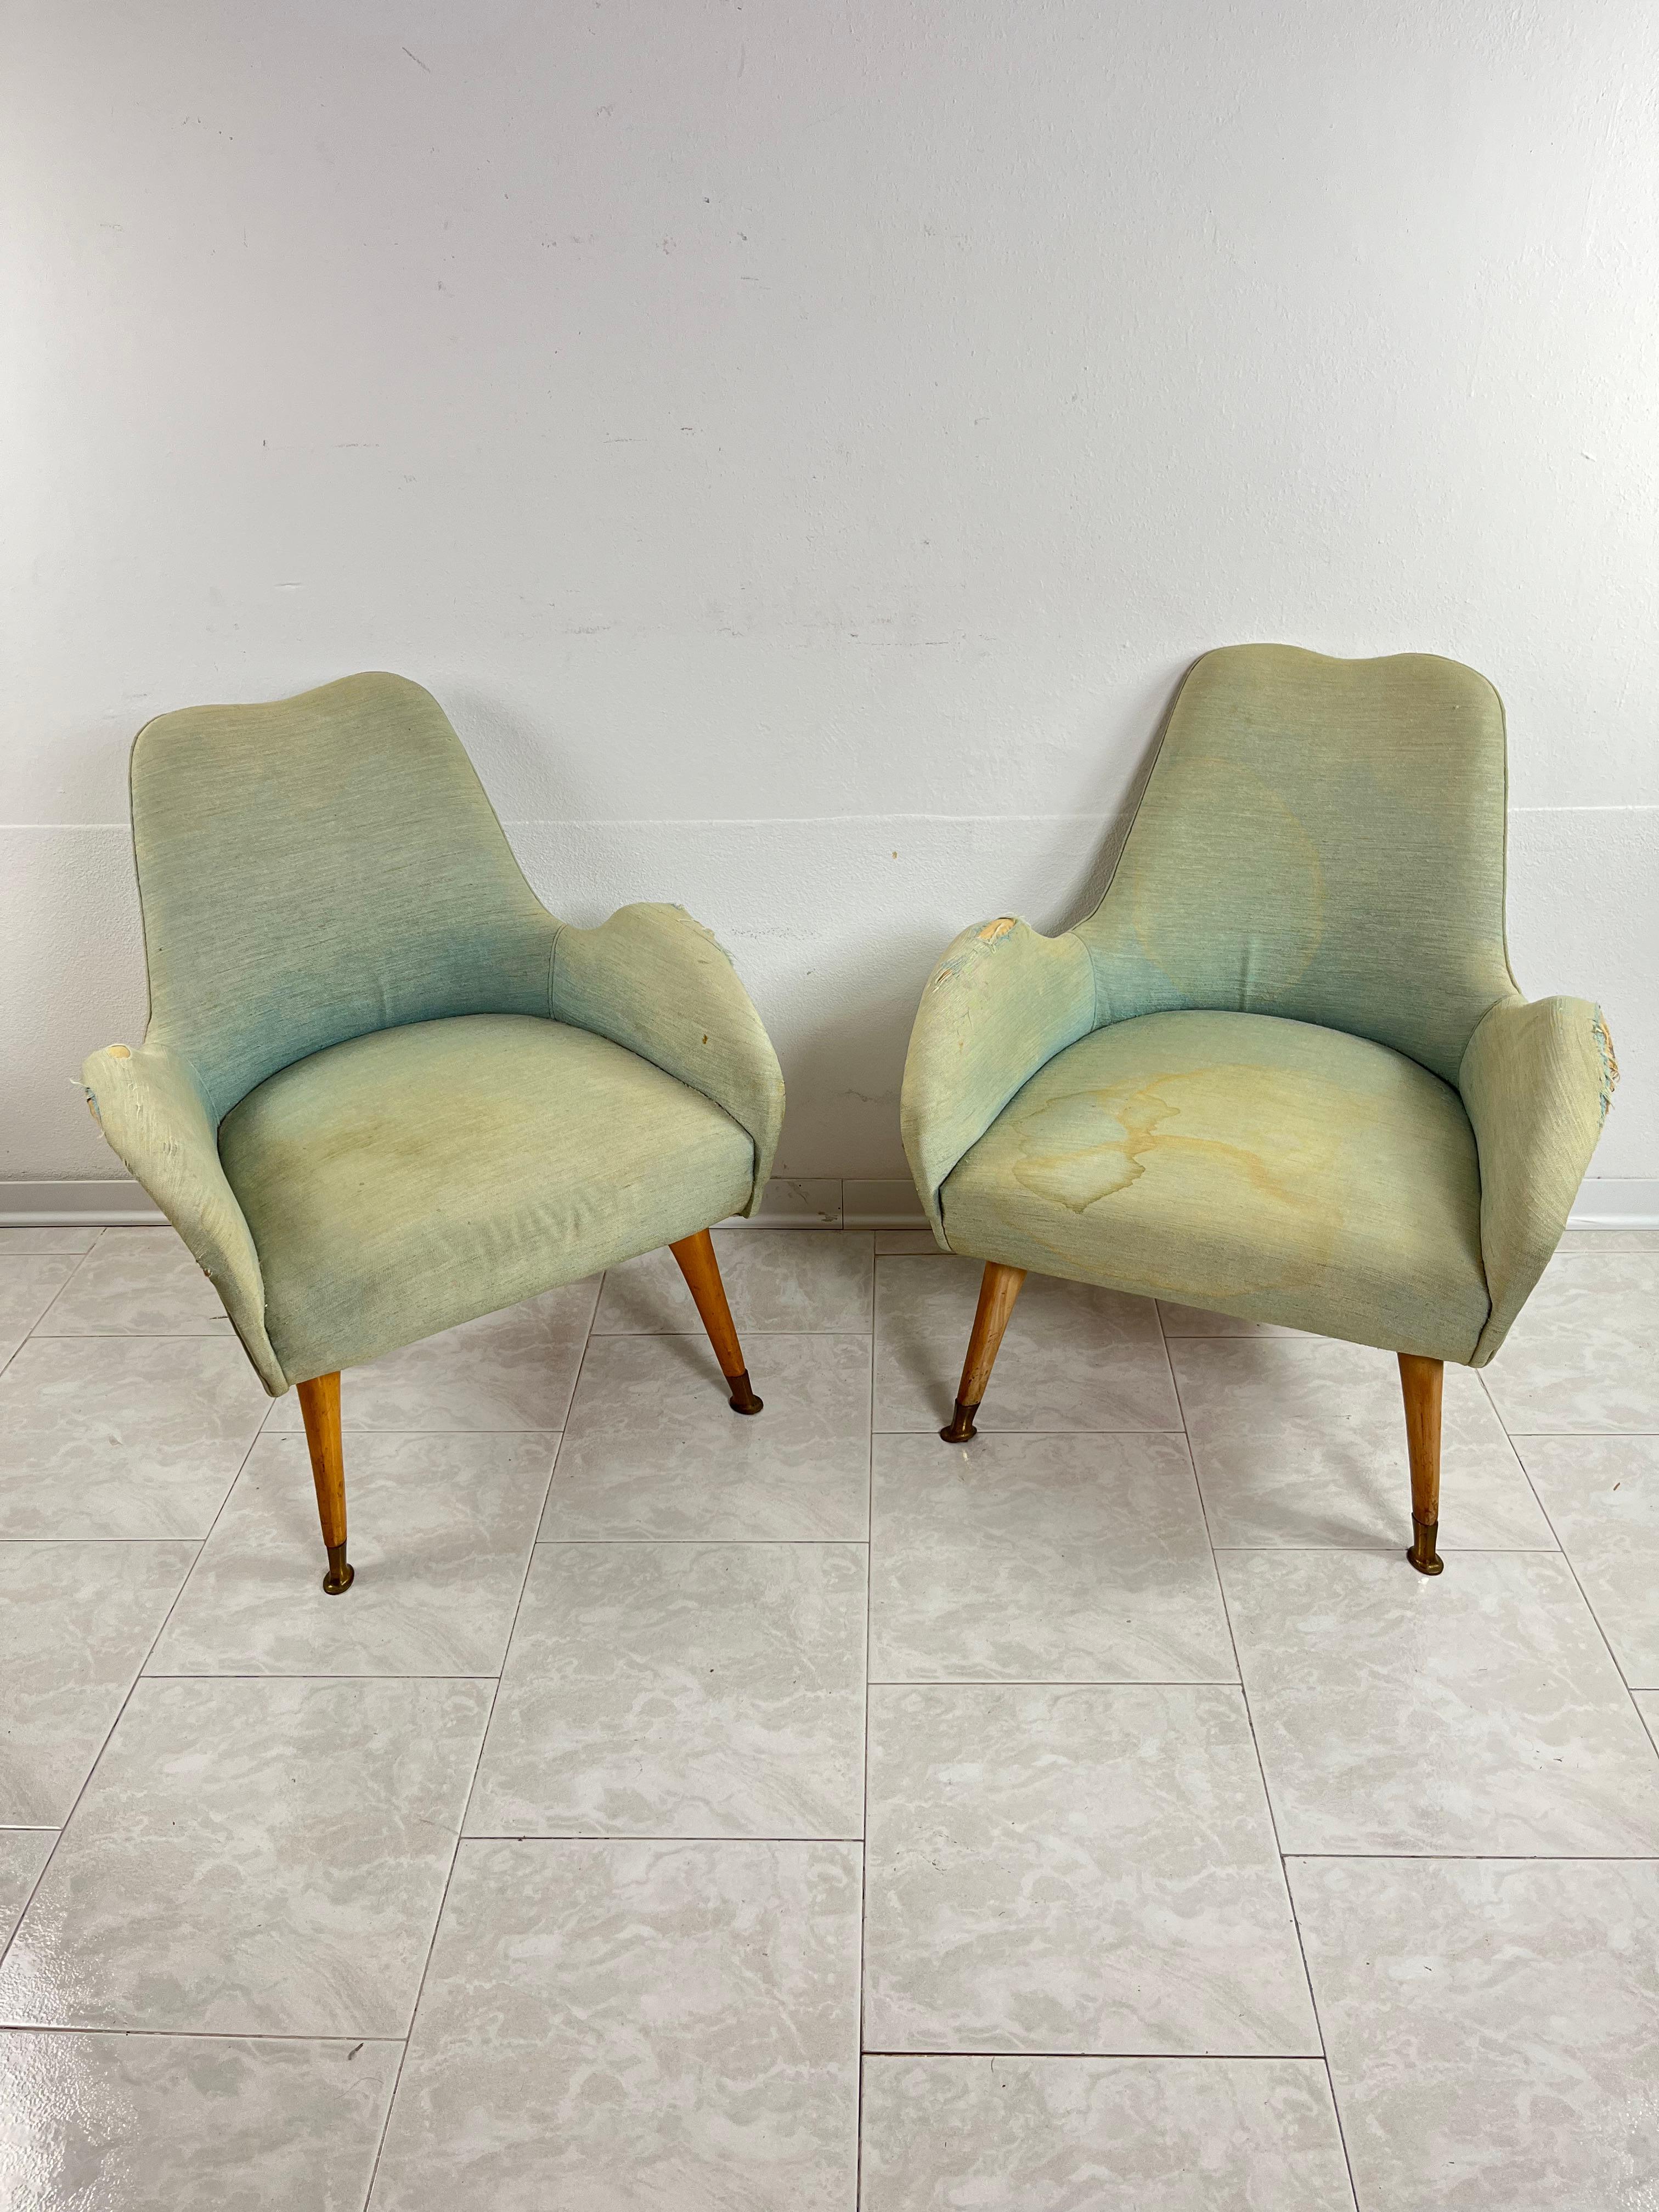 Pair of Mid-Century armchairs attributed to Federico Munari 1950s
The structures are stable and in good condition. The covering is the original one, it would be advisable to reupholster them.
Brass details.